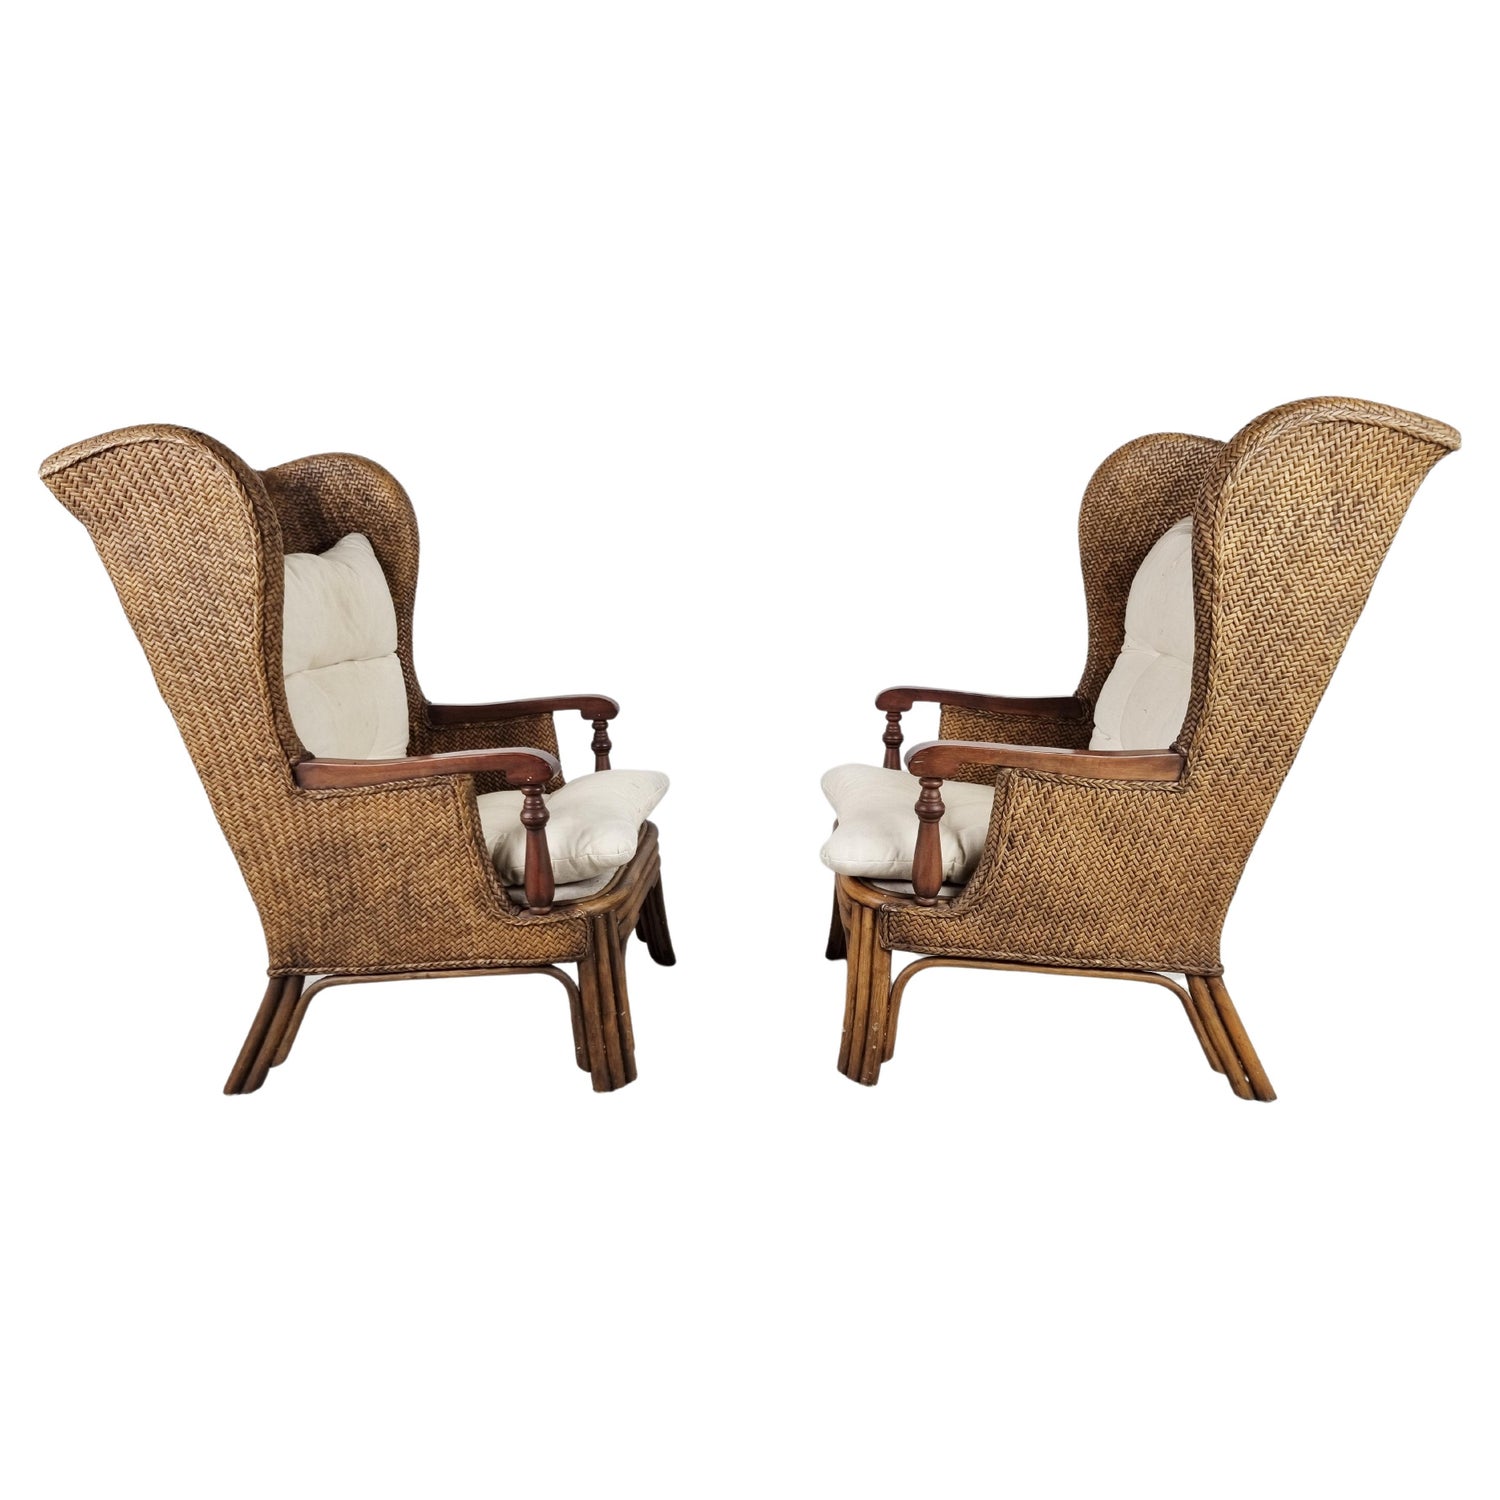 Pair of Wicker Wingback Armchairs, 1950s at 1stDibs